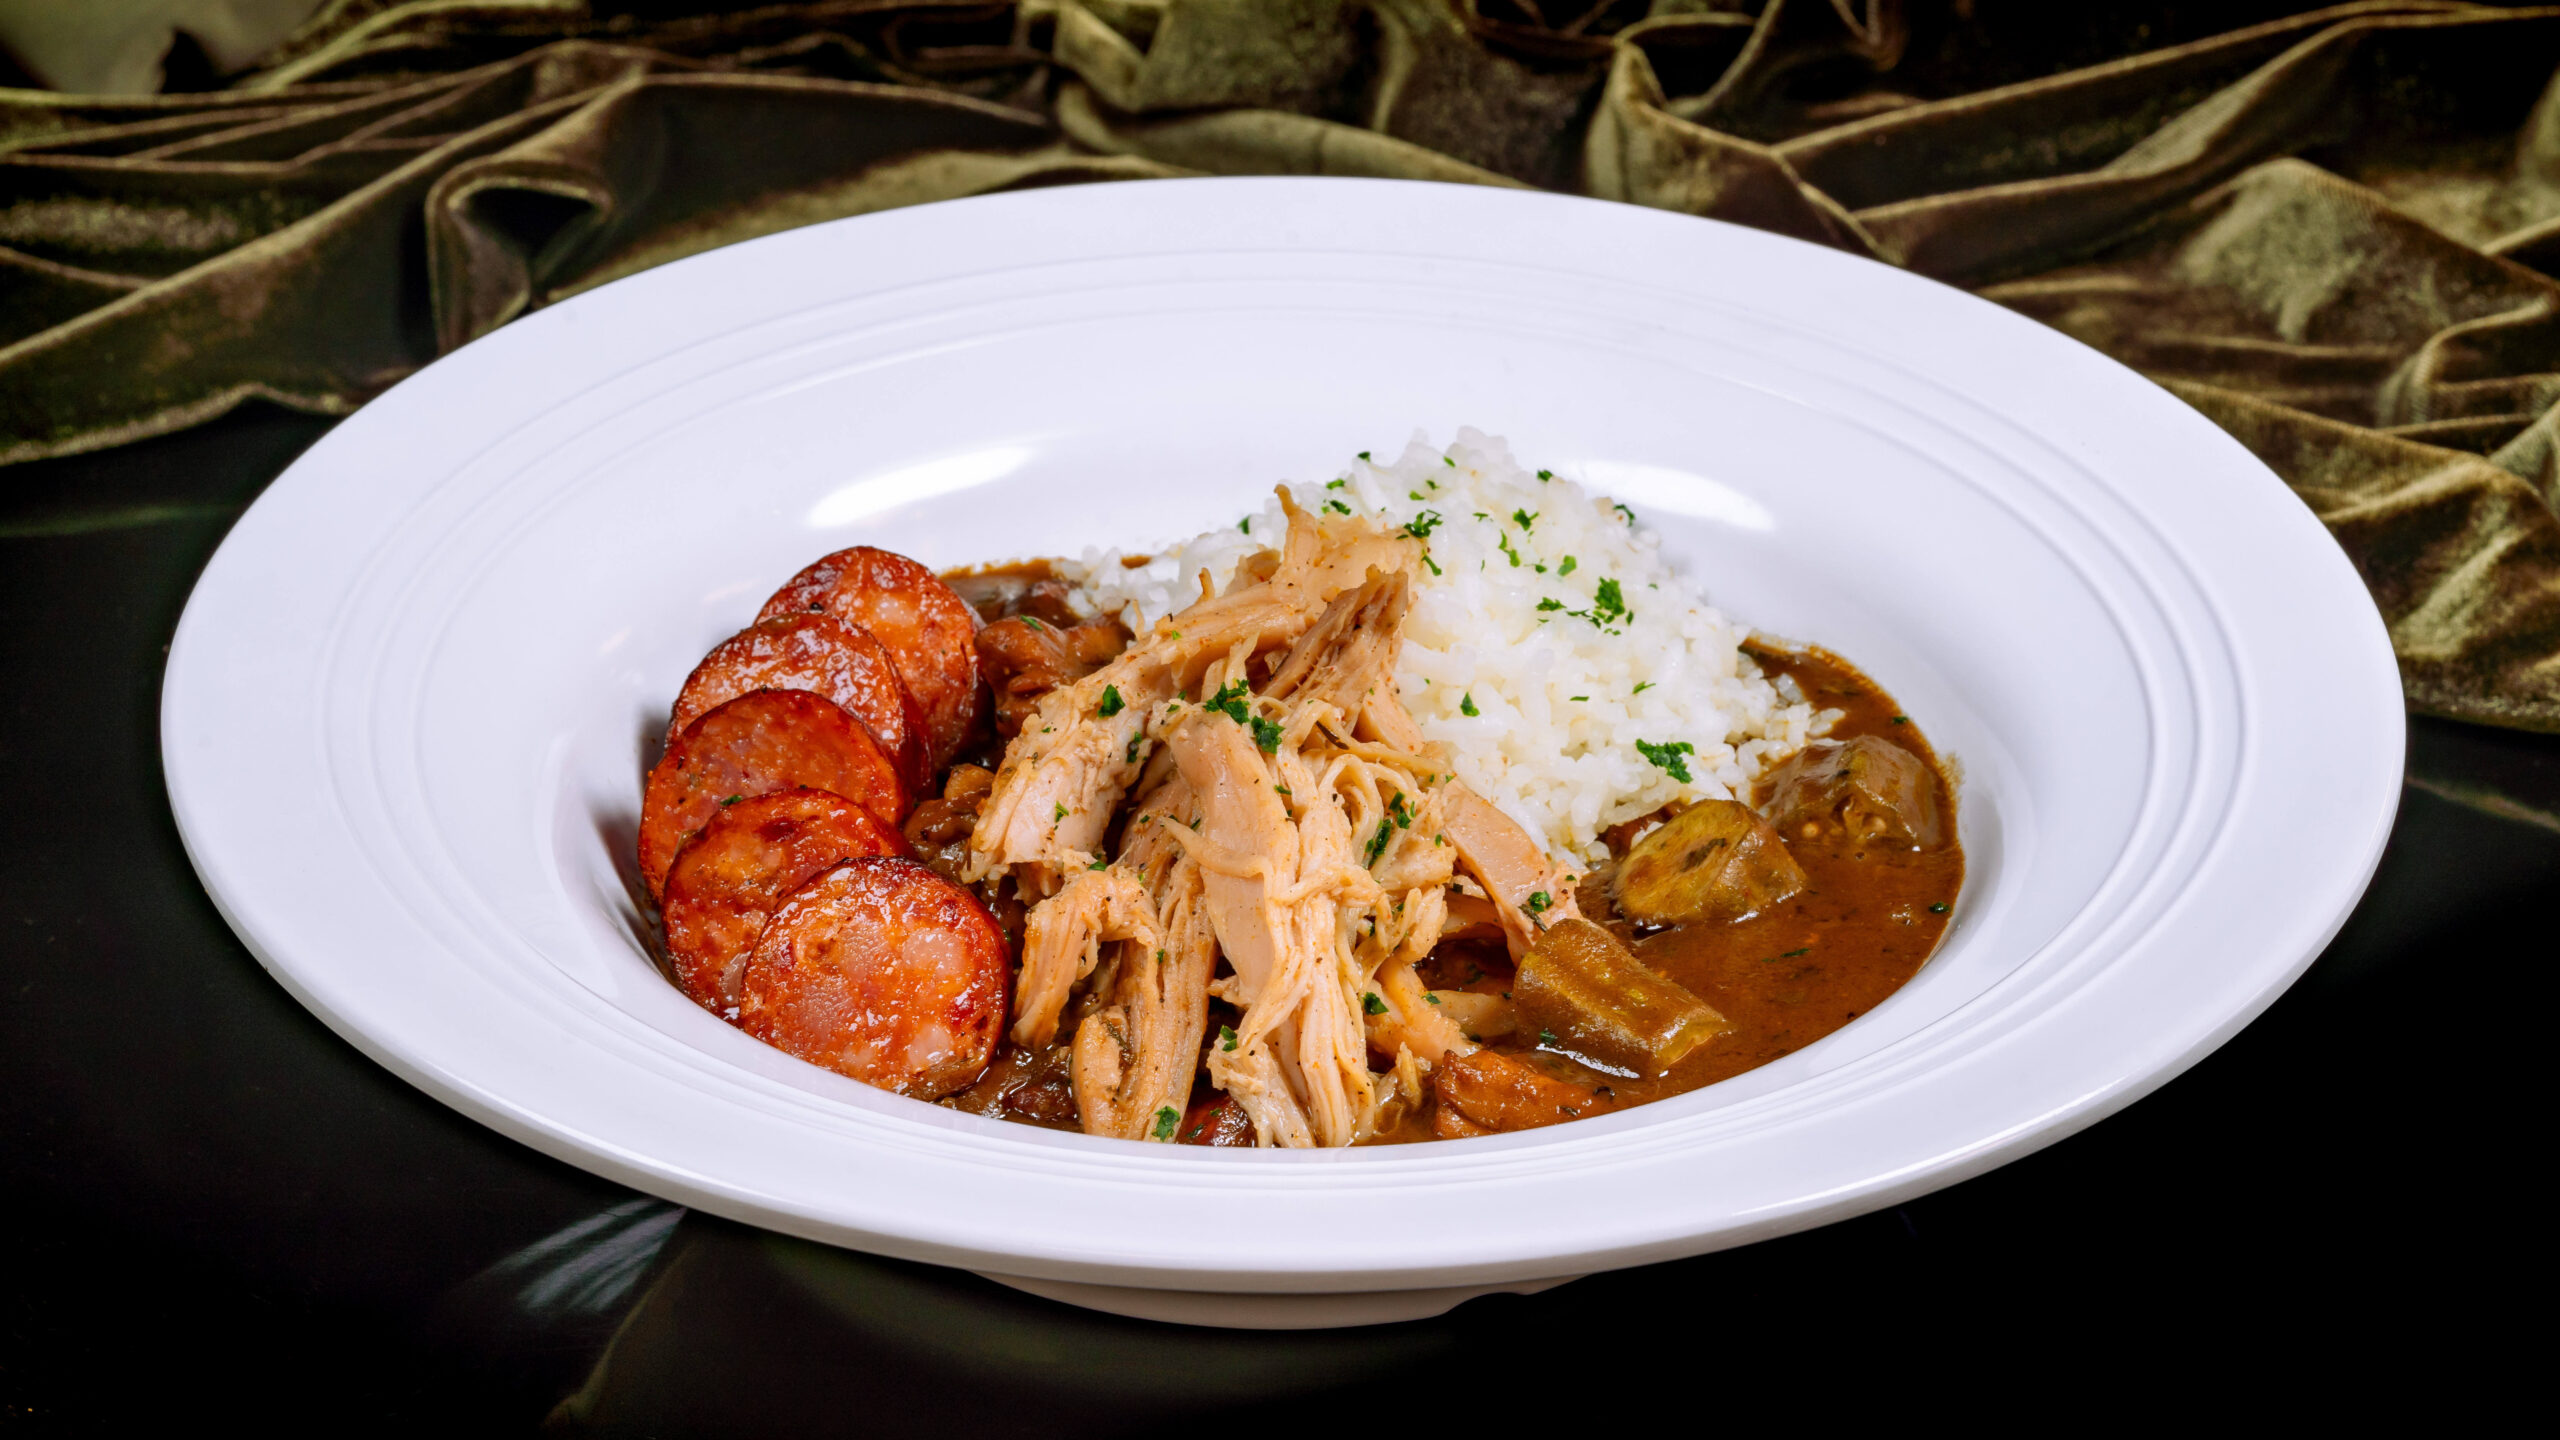 House Gumbo (Tiana’s Palace at Disneyland Park in Anaheim, Calif.) – braised chicken, andouille sausage and heirloom rice. Available beginning Sept. 7, 2023. For more details, visit DisneyParksBlog.com. (David Nguyen/Disneyland Resort)